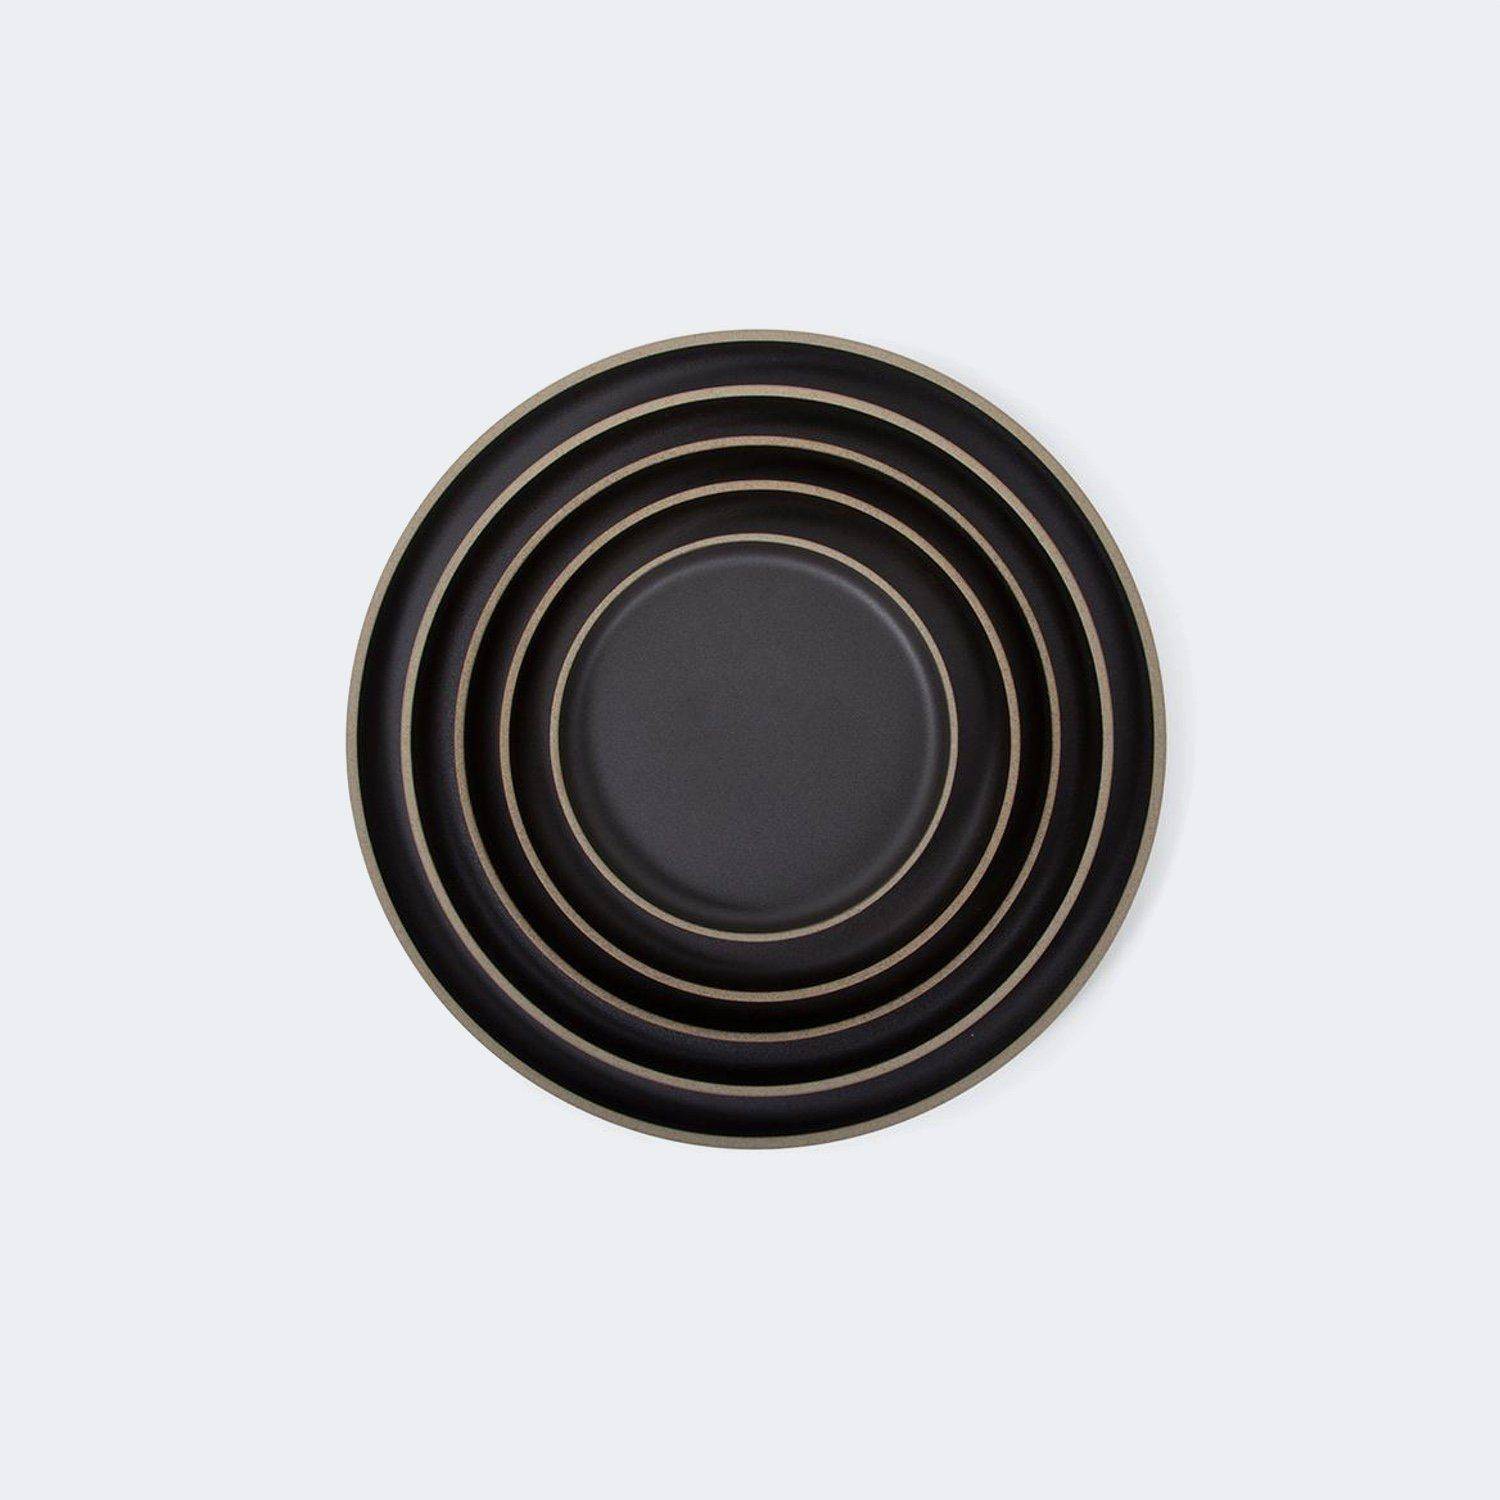 Hasami Porcelain Plate in Black - KANSO